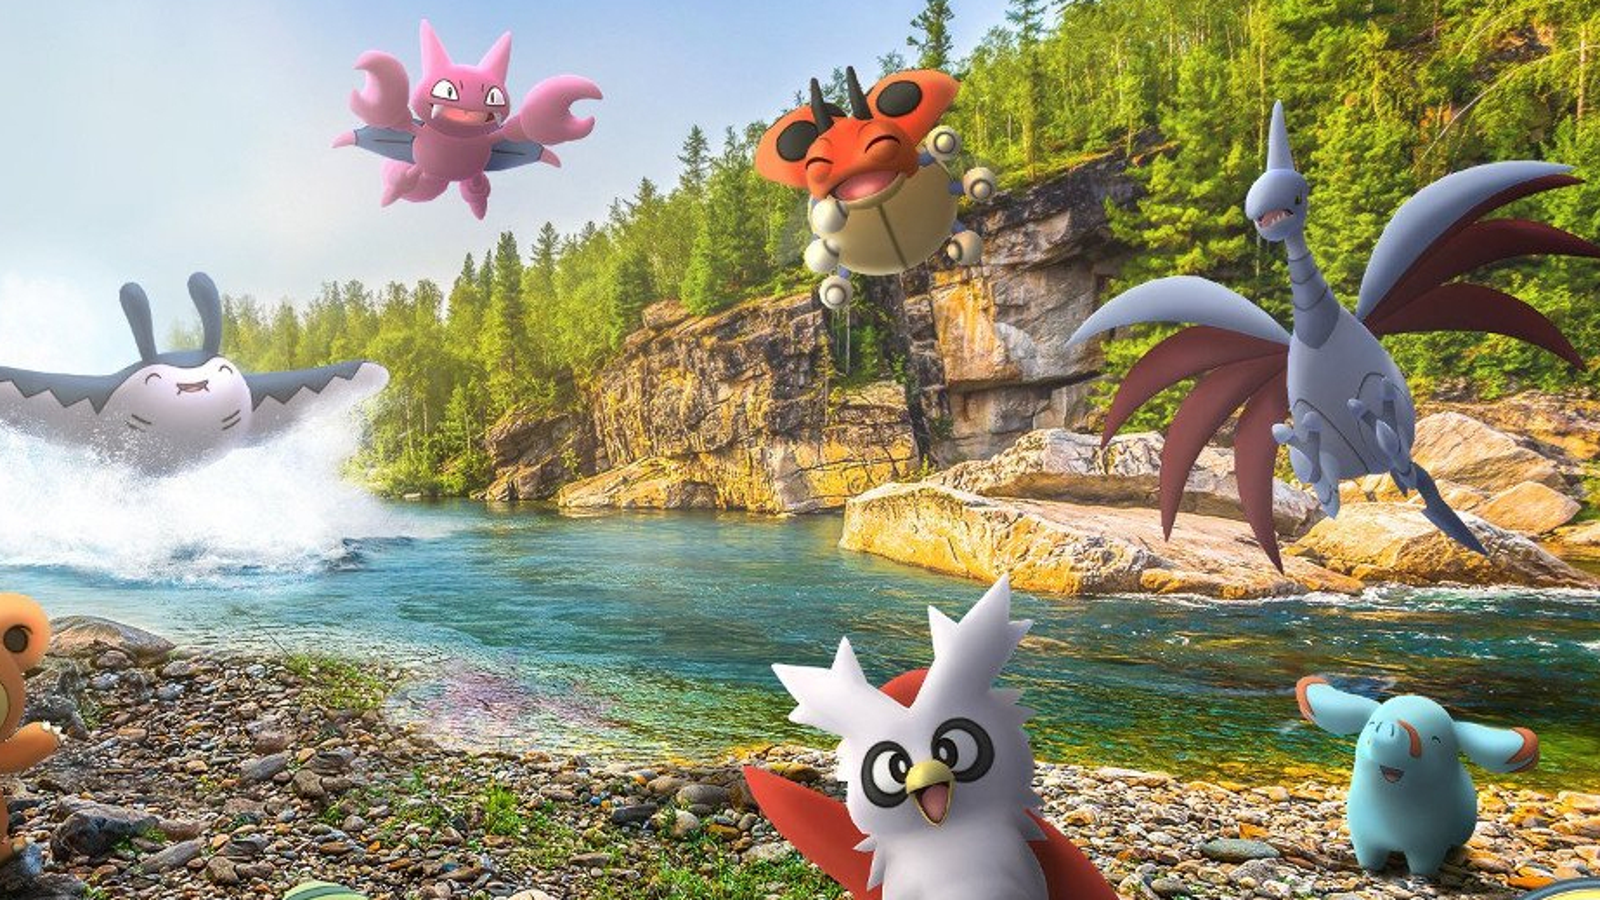 Pokemon Sword and Shield's Legendary Types Were Teased Before, But No One  Realized It